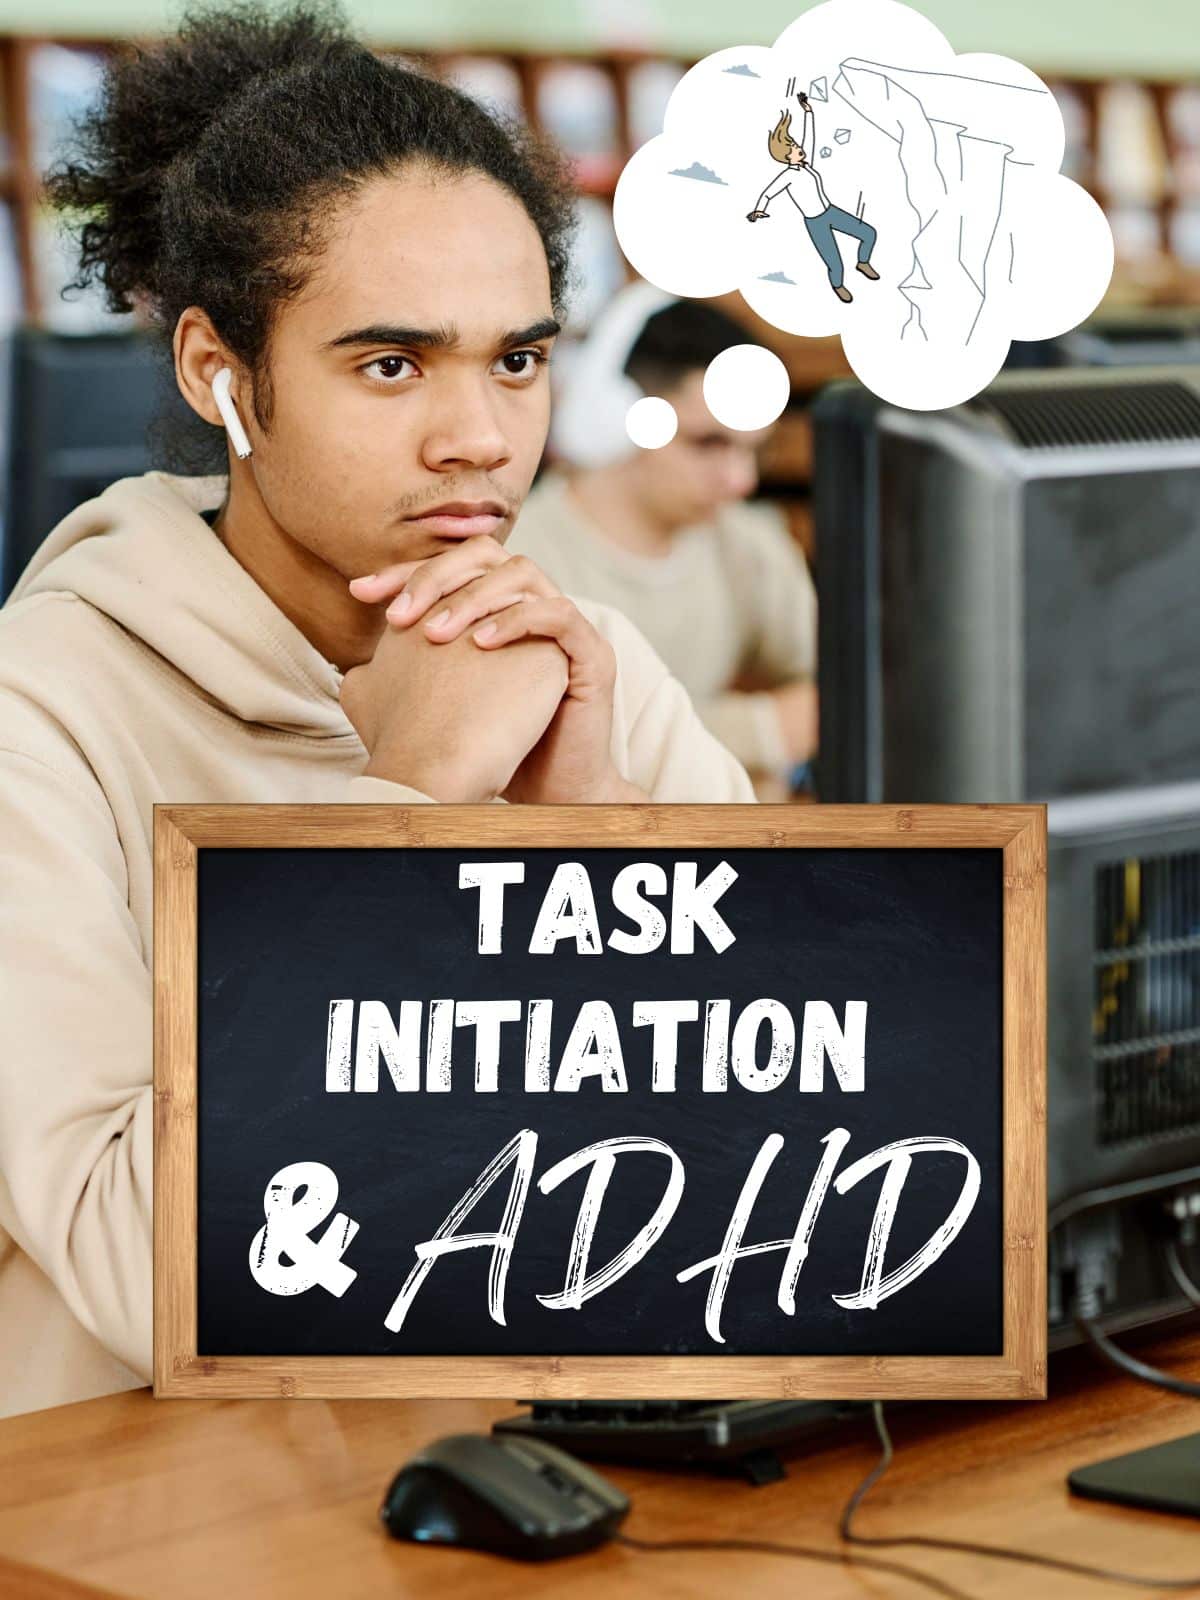 A teenager procrastinating with a thought bubble showing a guy trying to climb a mountain and the text "Task Initiation and ADHD."